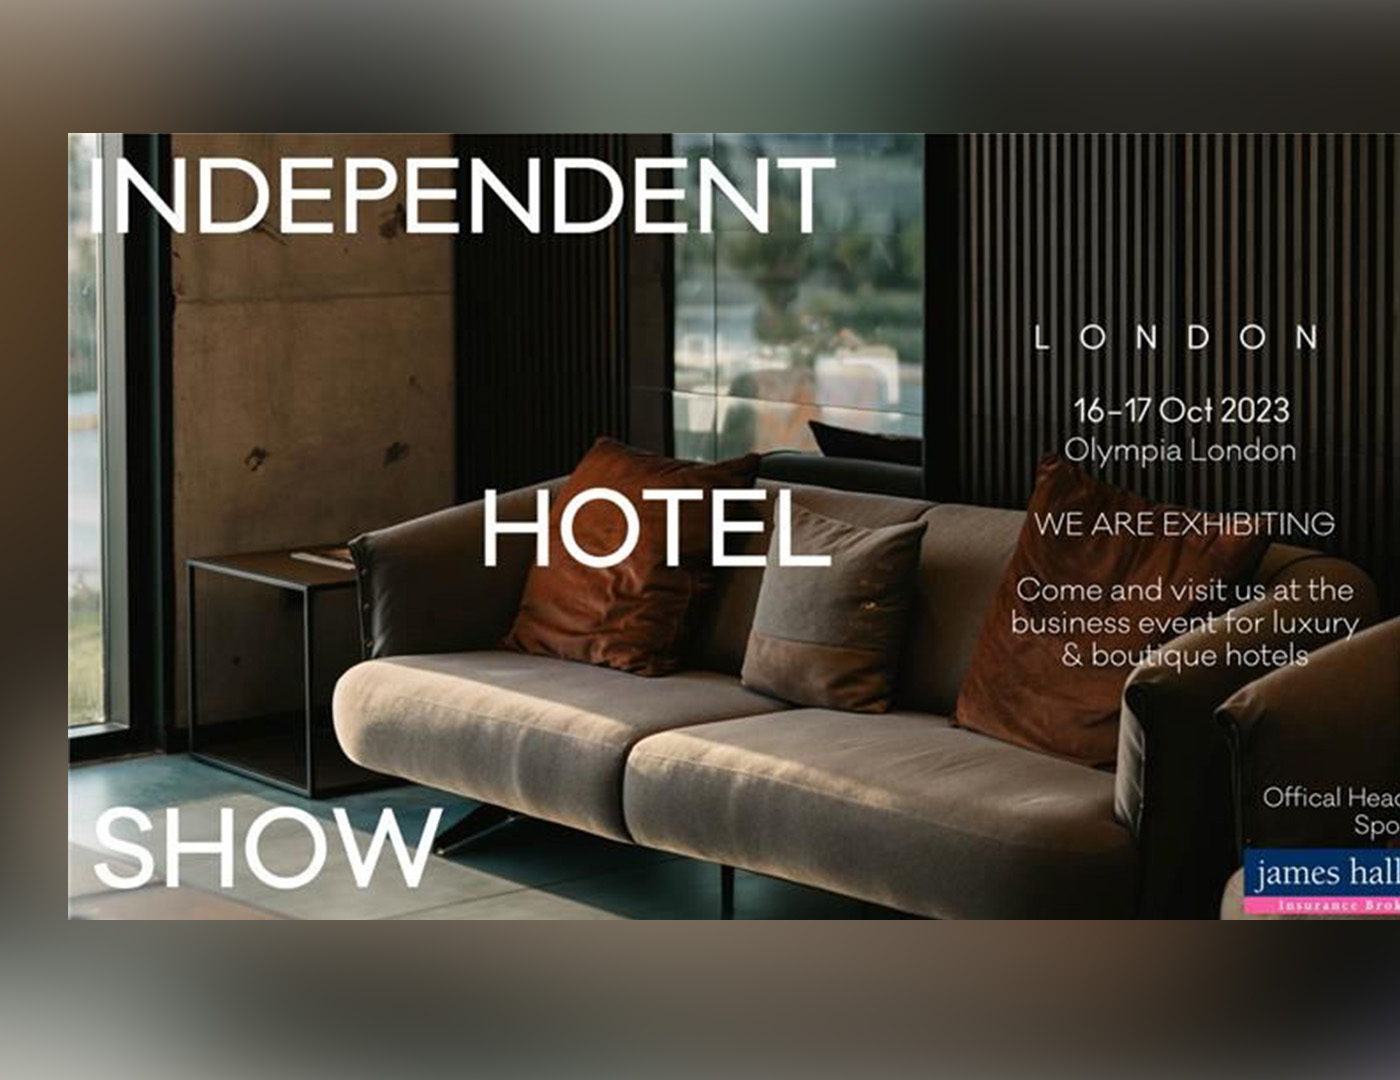 PTSG to take part in Independent Hotel Show 